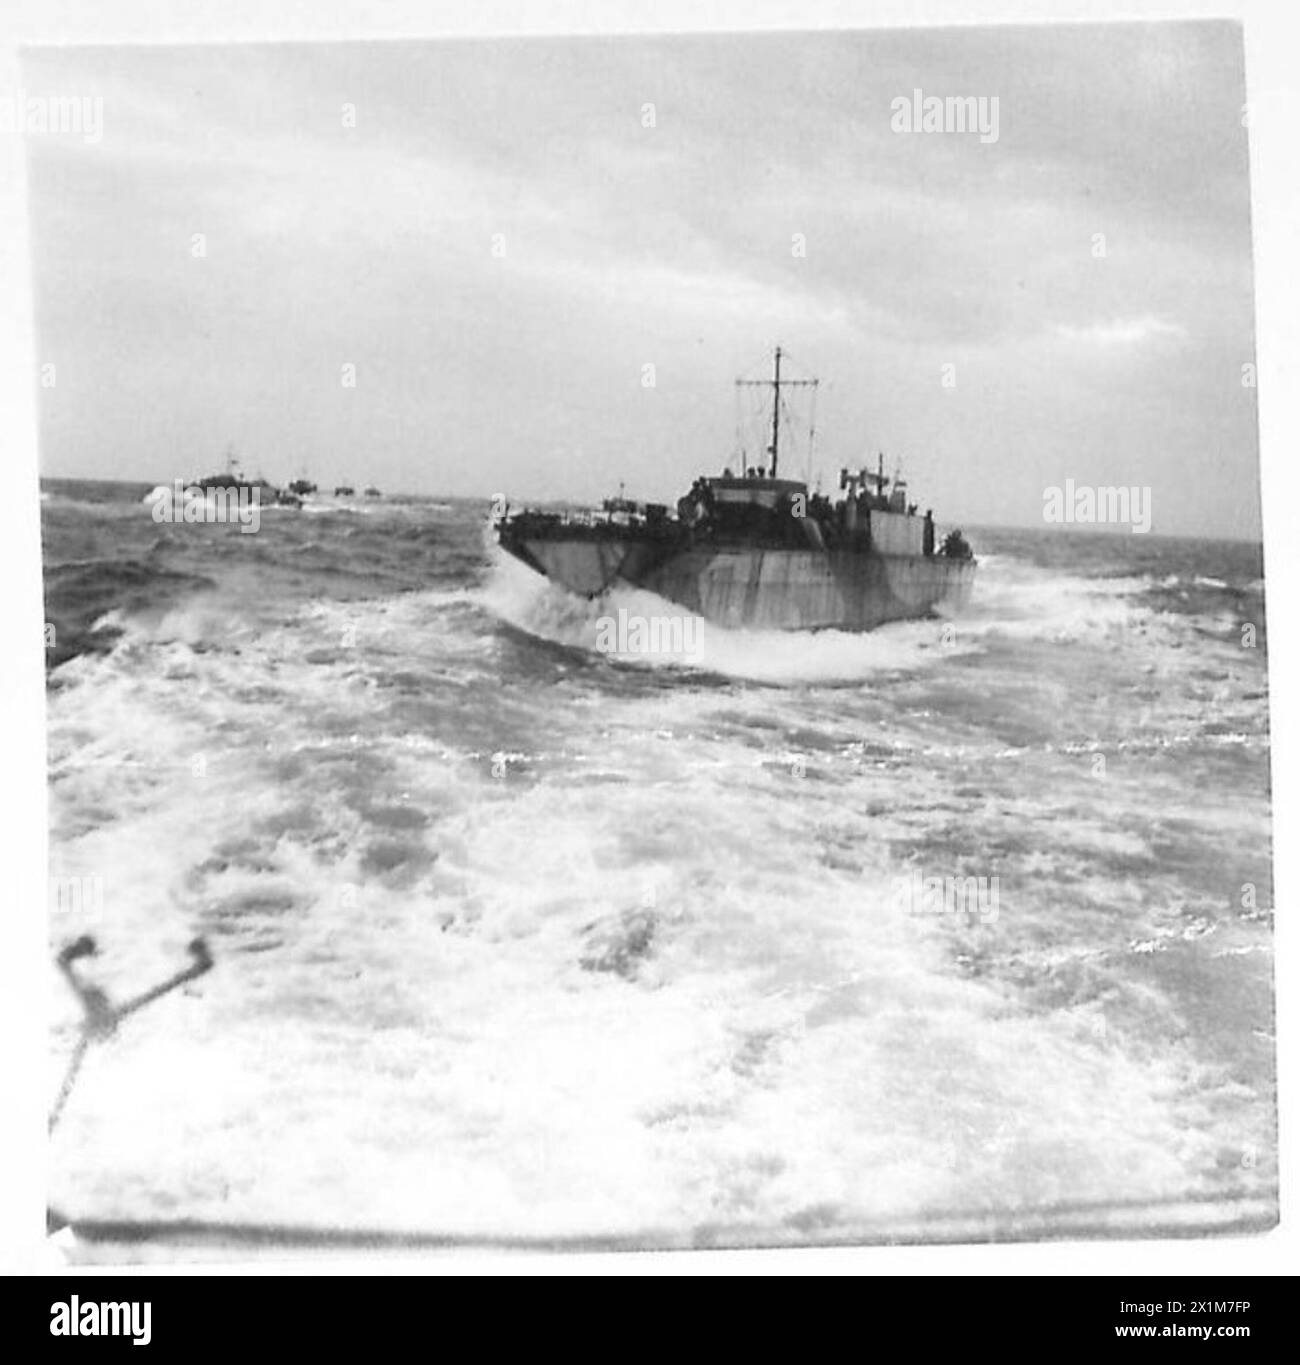 D-DAY - BRITISH FORCES DURING THE INVASION OF NORMANDY 6 JUNE 1944 - LCI(S) 502 and other landing craft carrying commandos of 1st Special Service Brigade to Normandy, 5/6 June 1944, Stock Photo